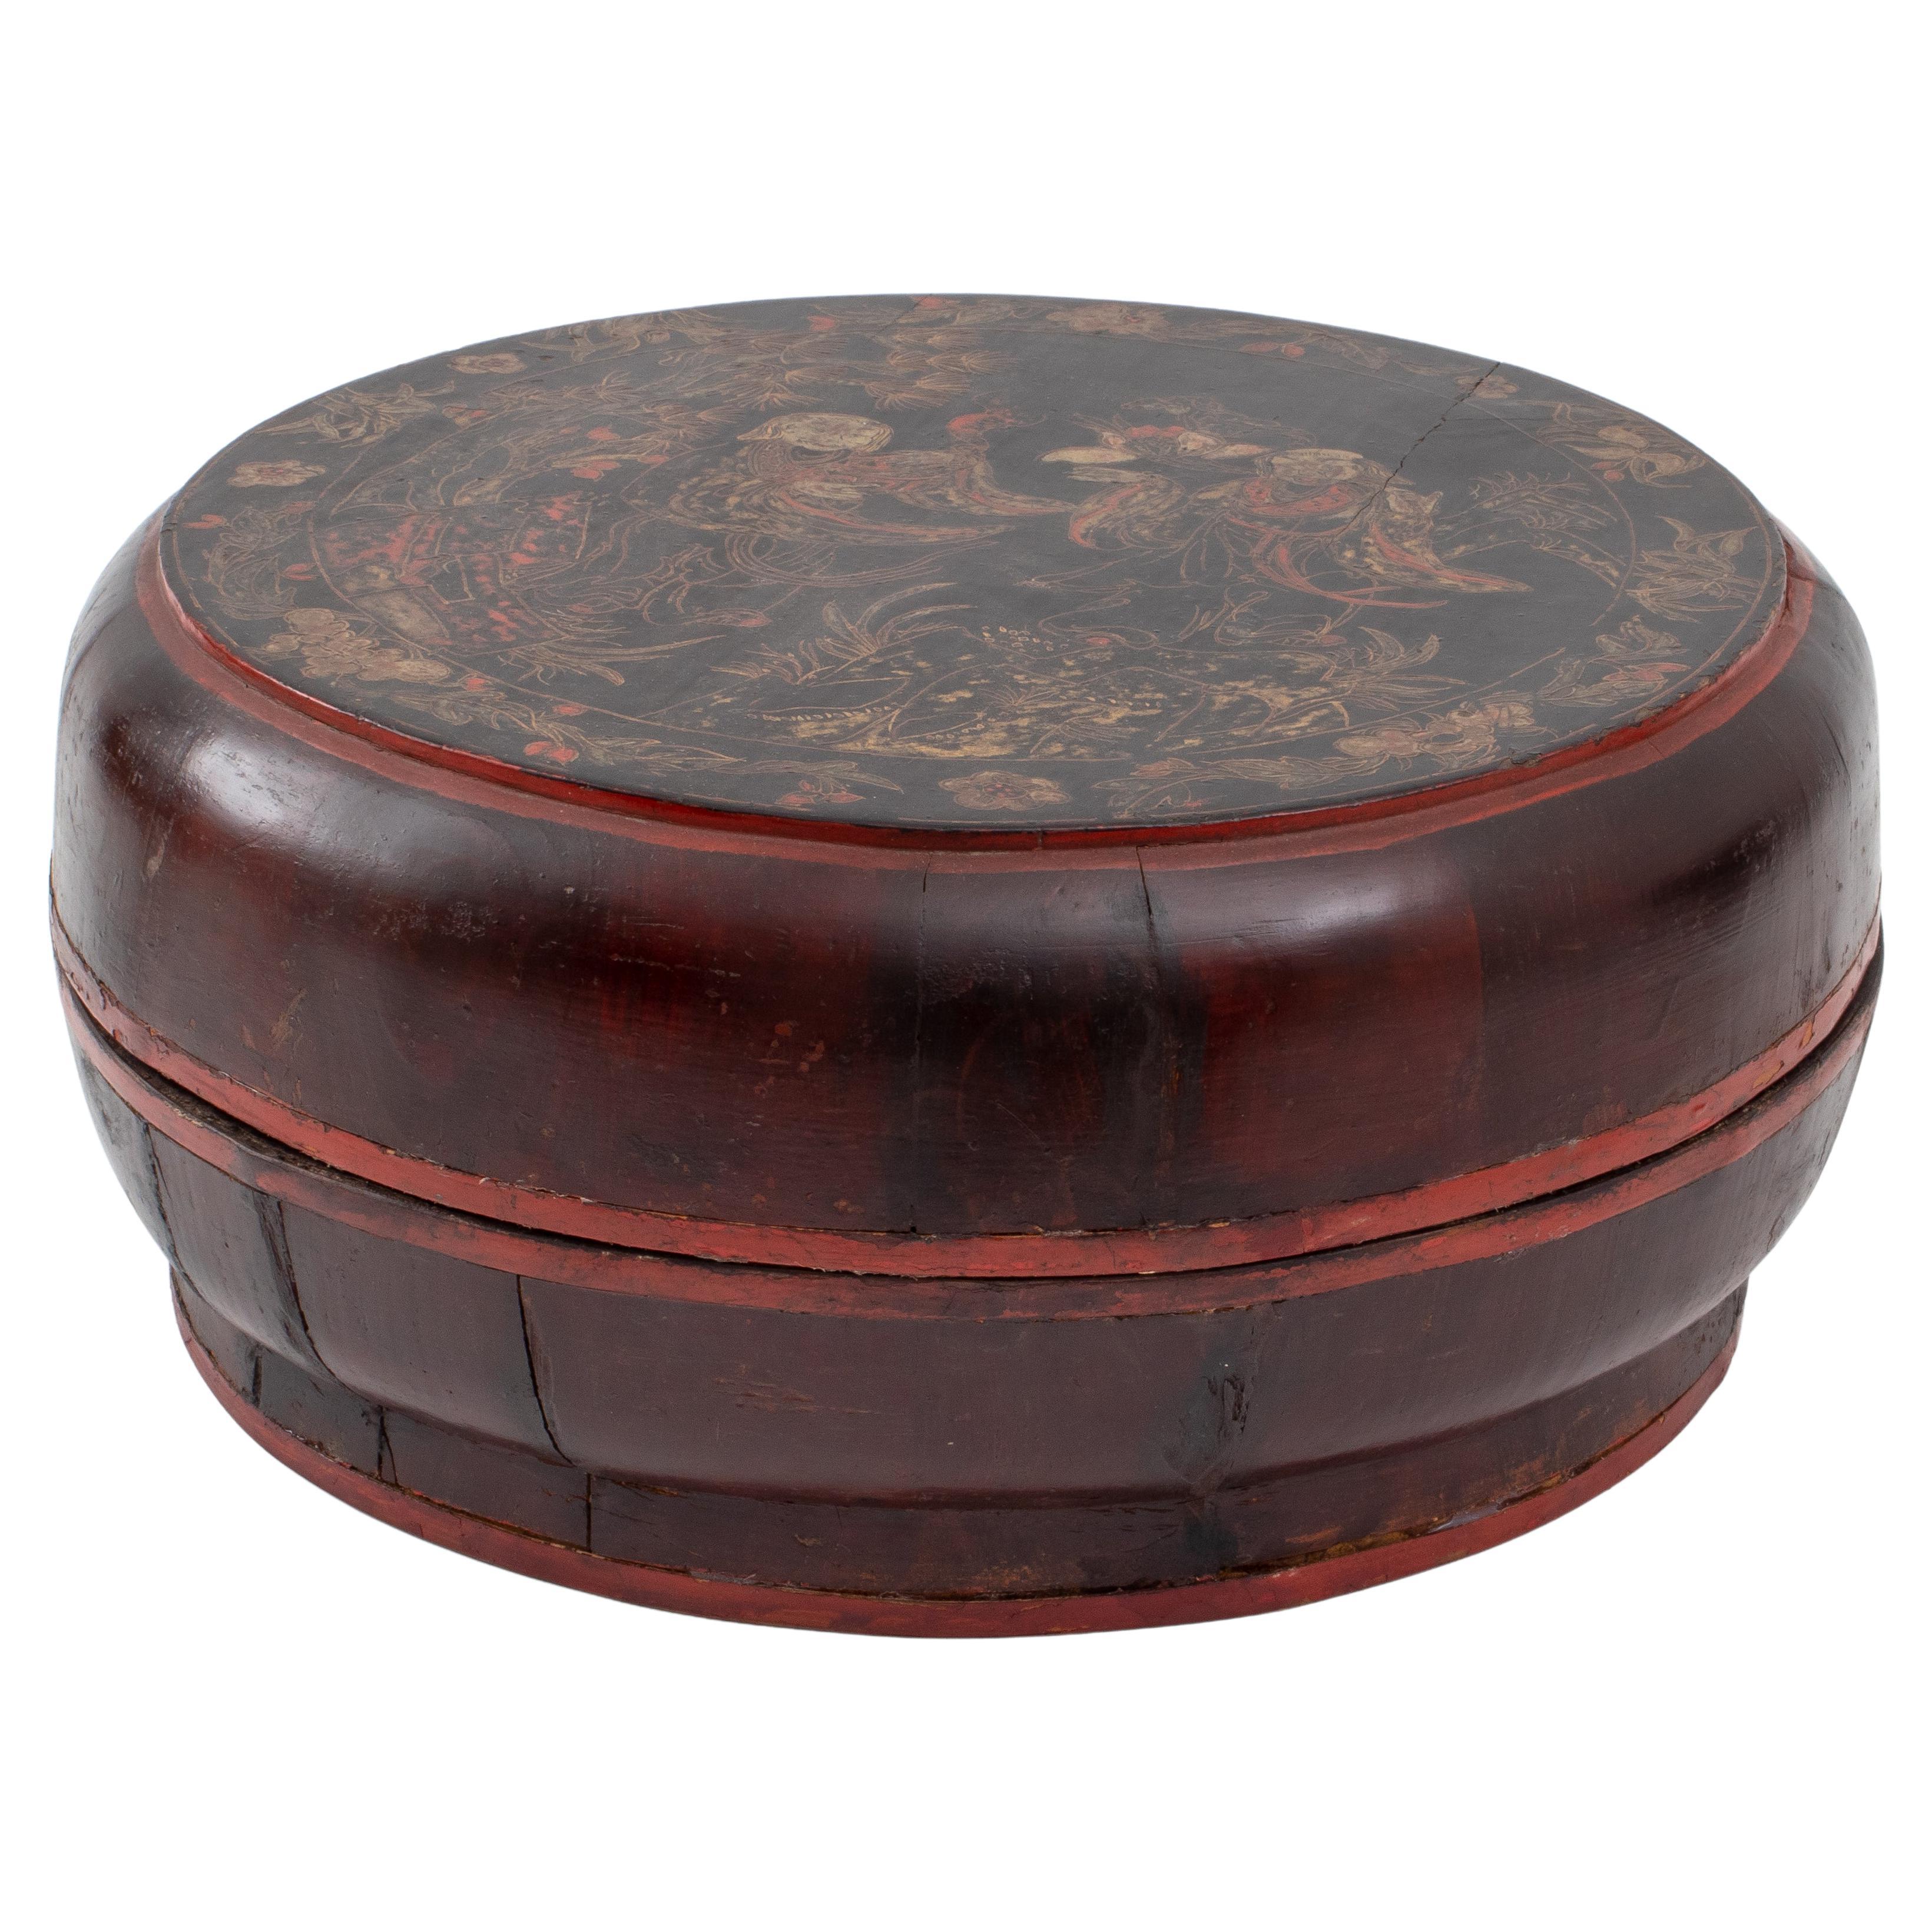 Japanese Lacquered Drum-Shaped Box